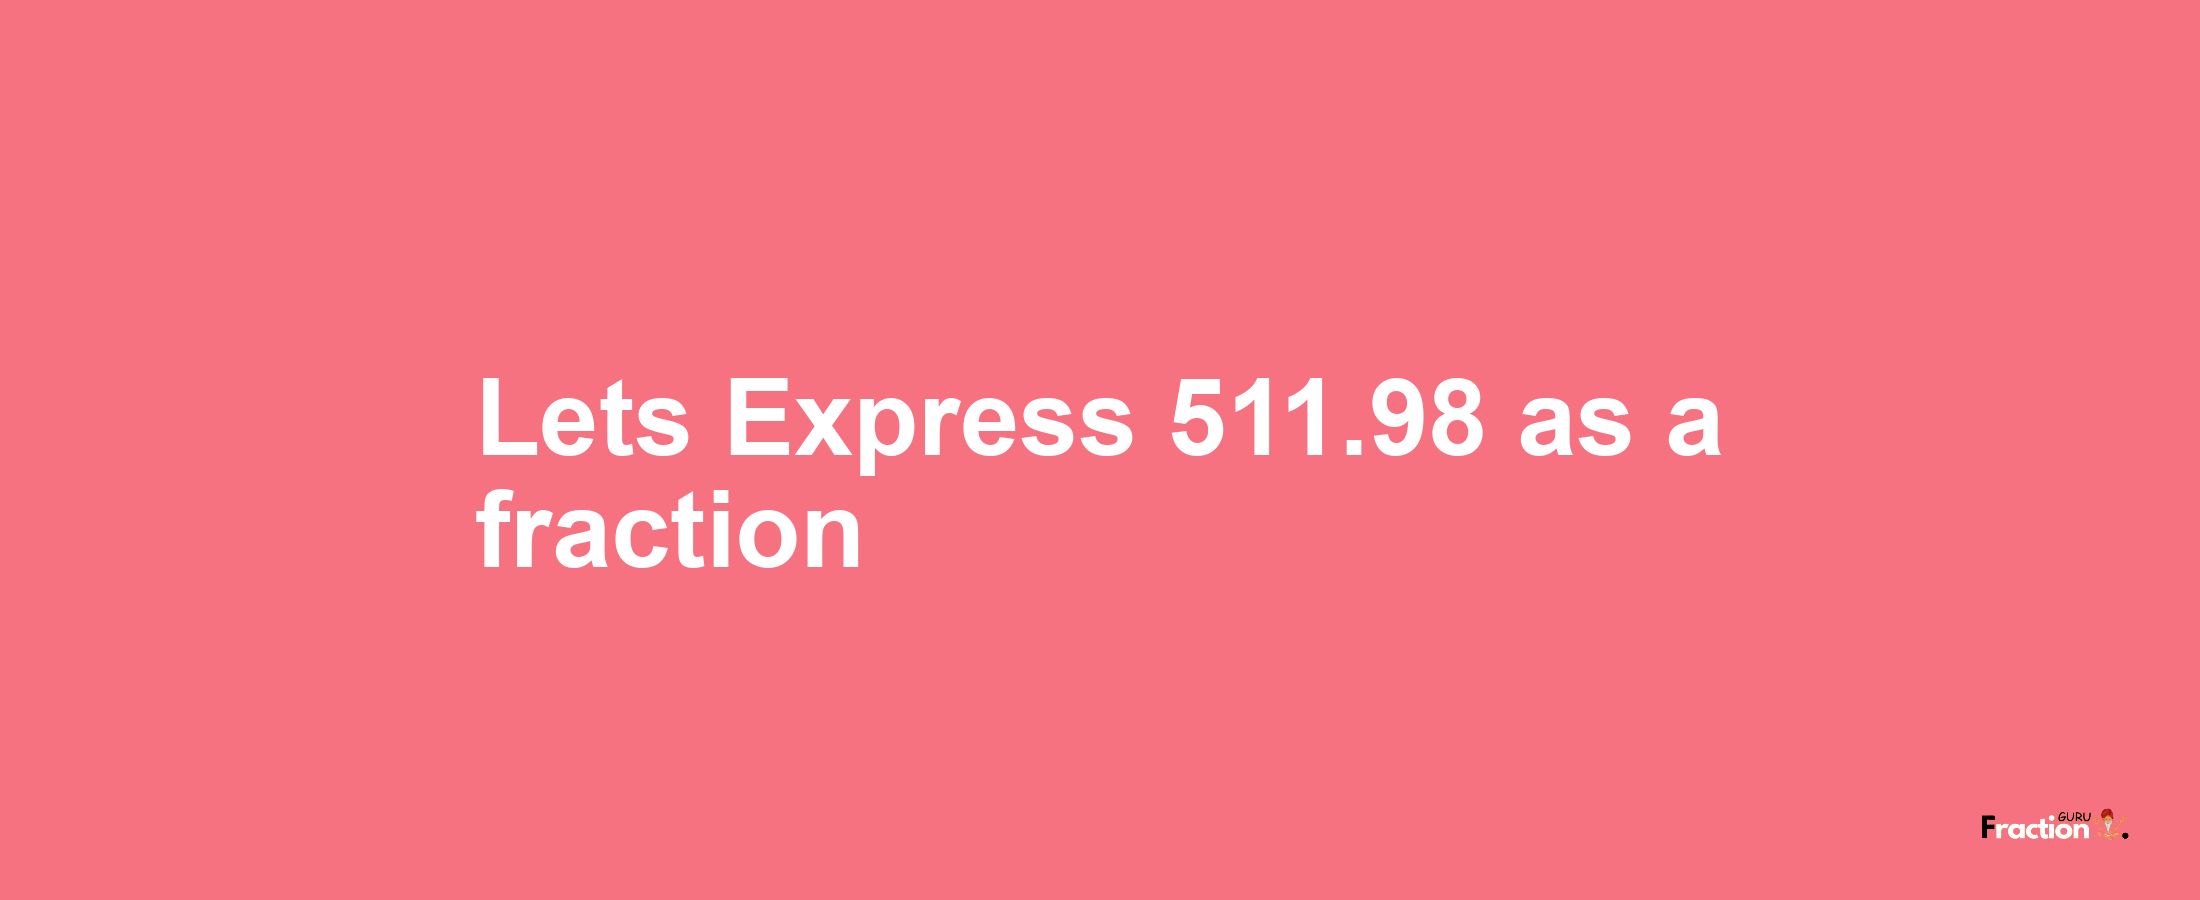 Lets Express 511.98 as afraction